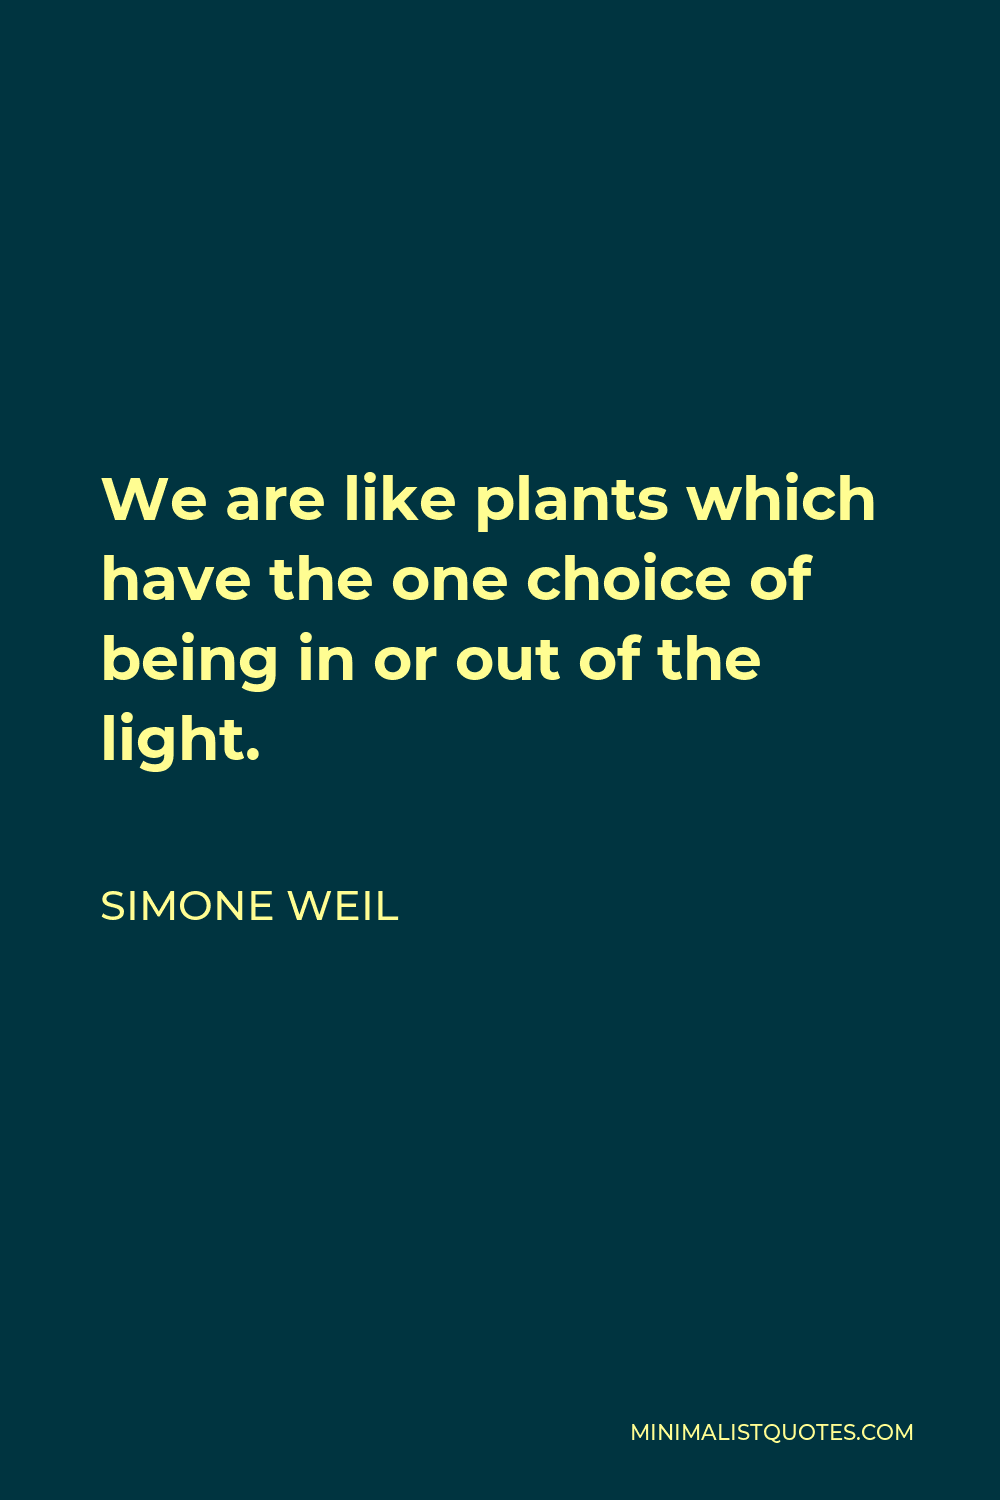 Simone Weil Quote - We are like plants which have the one choice of being in or out of the light.